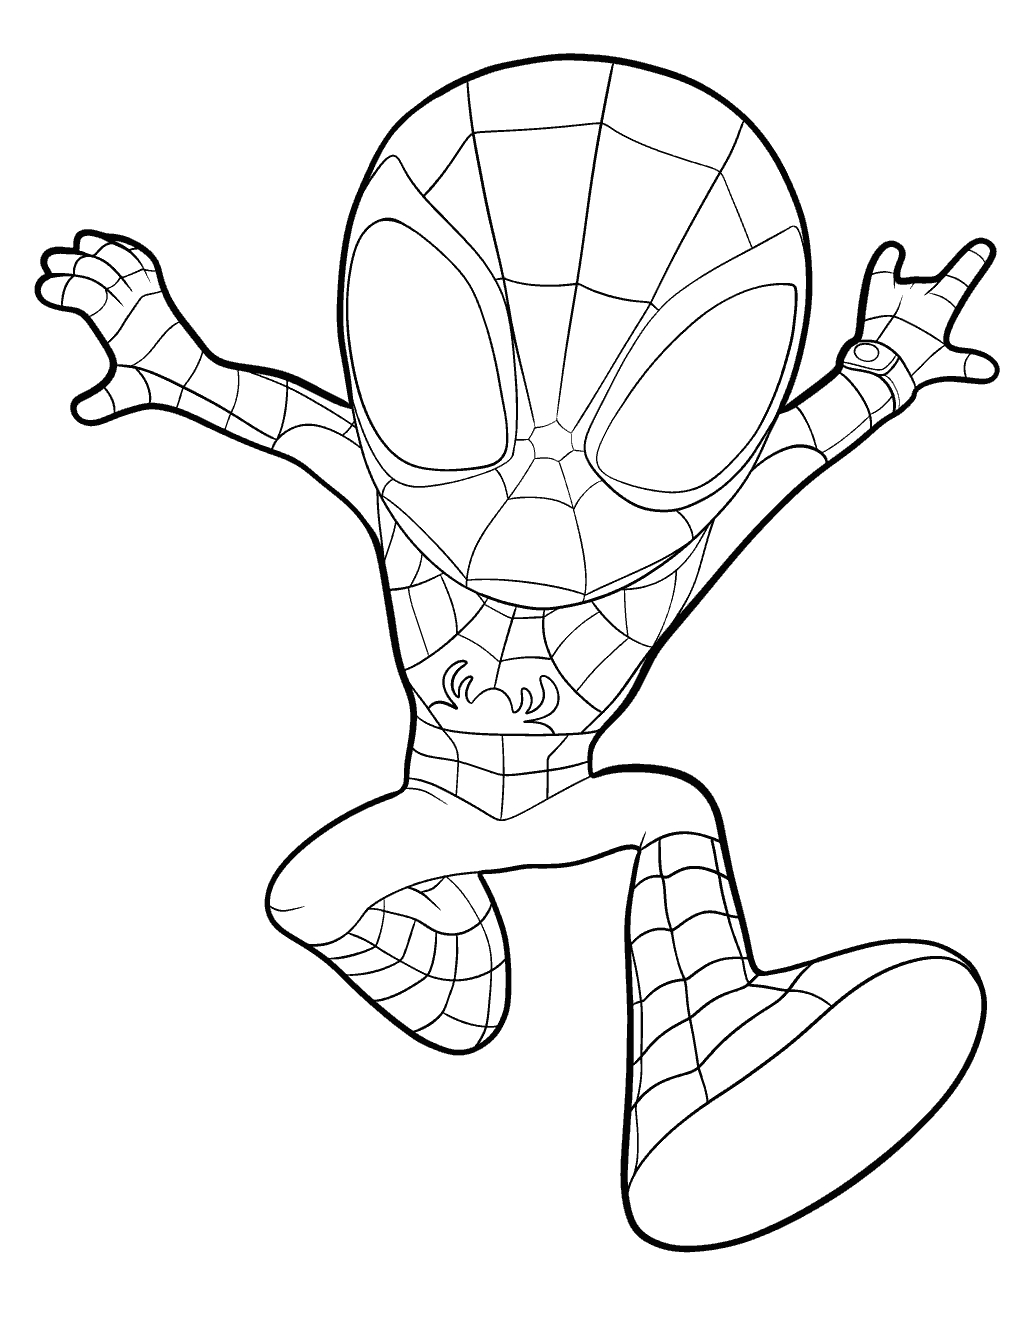 Spidey Hulk Throws A Punch Coloring Page